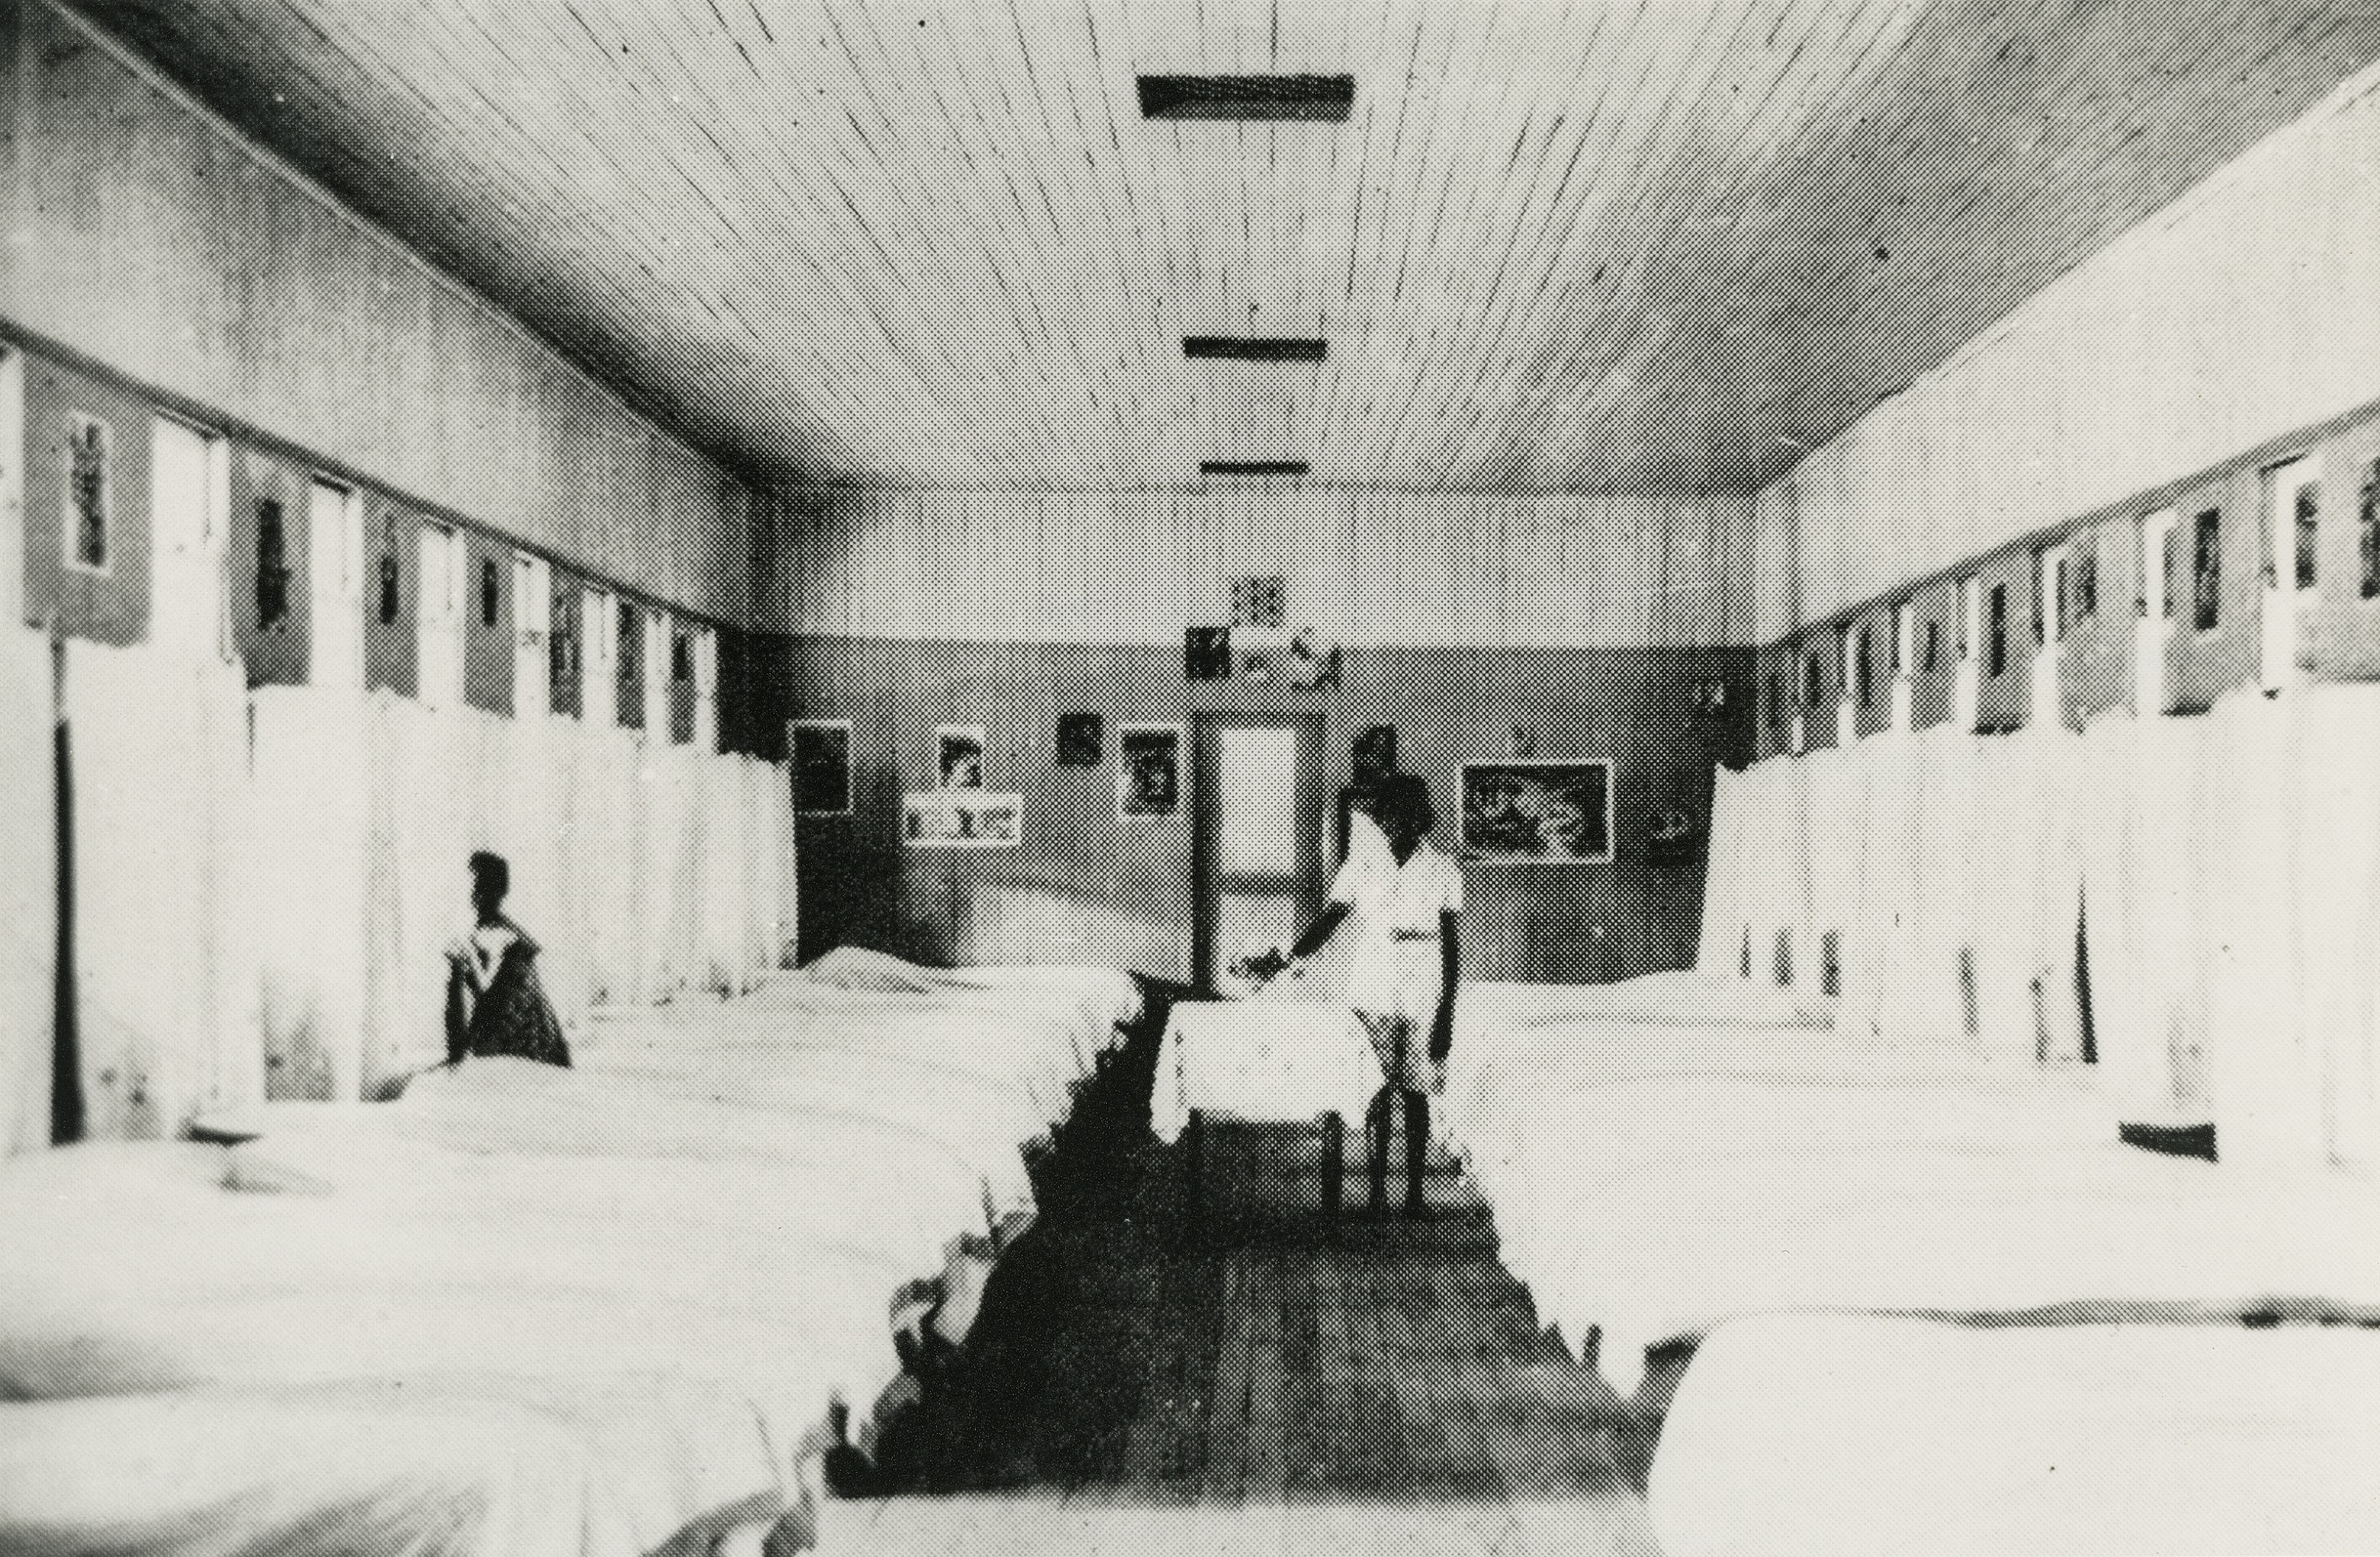 Black and white image of single beds in two rows against a wall.